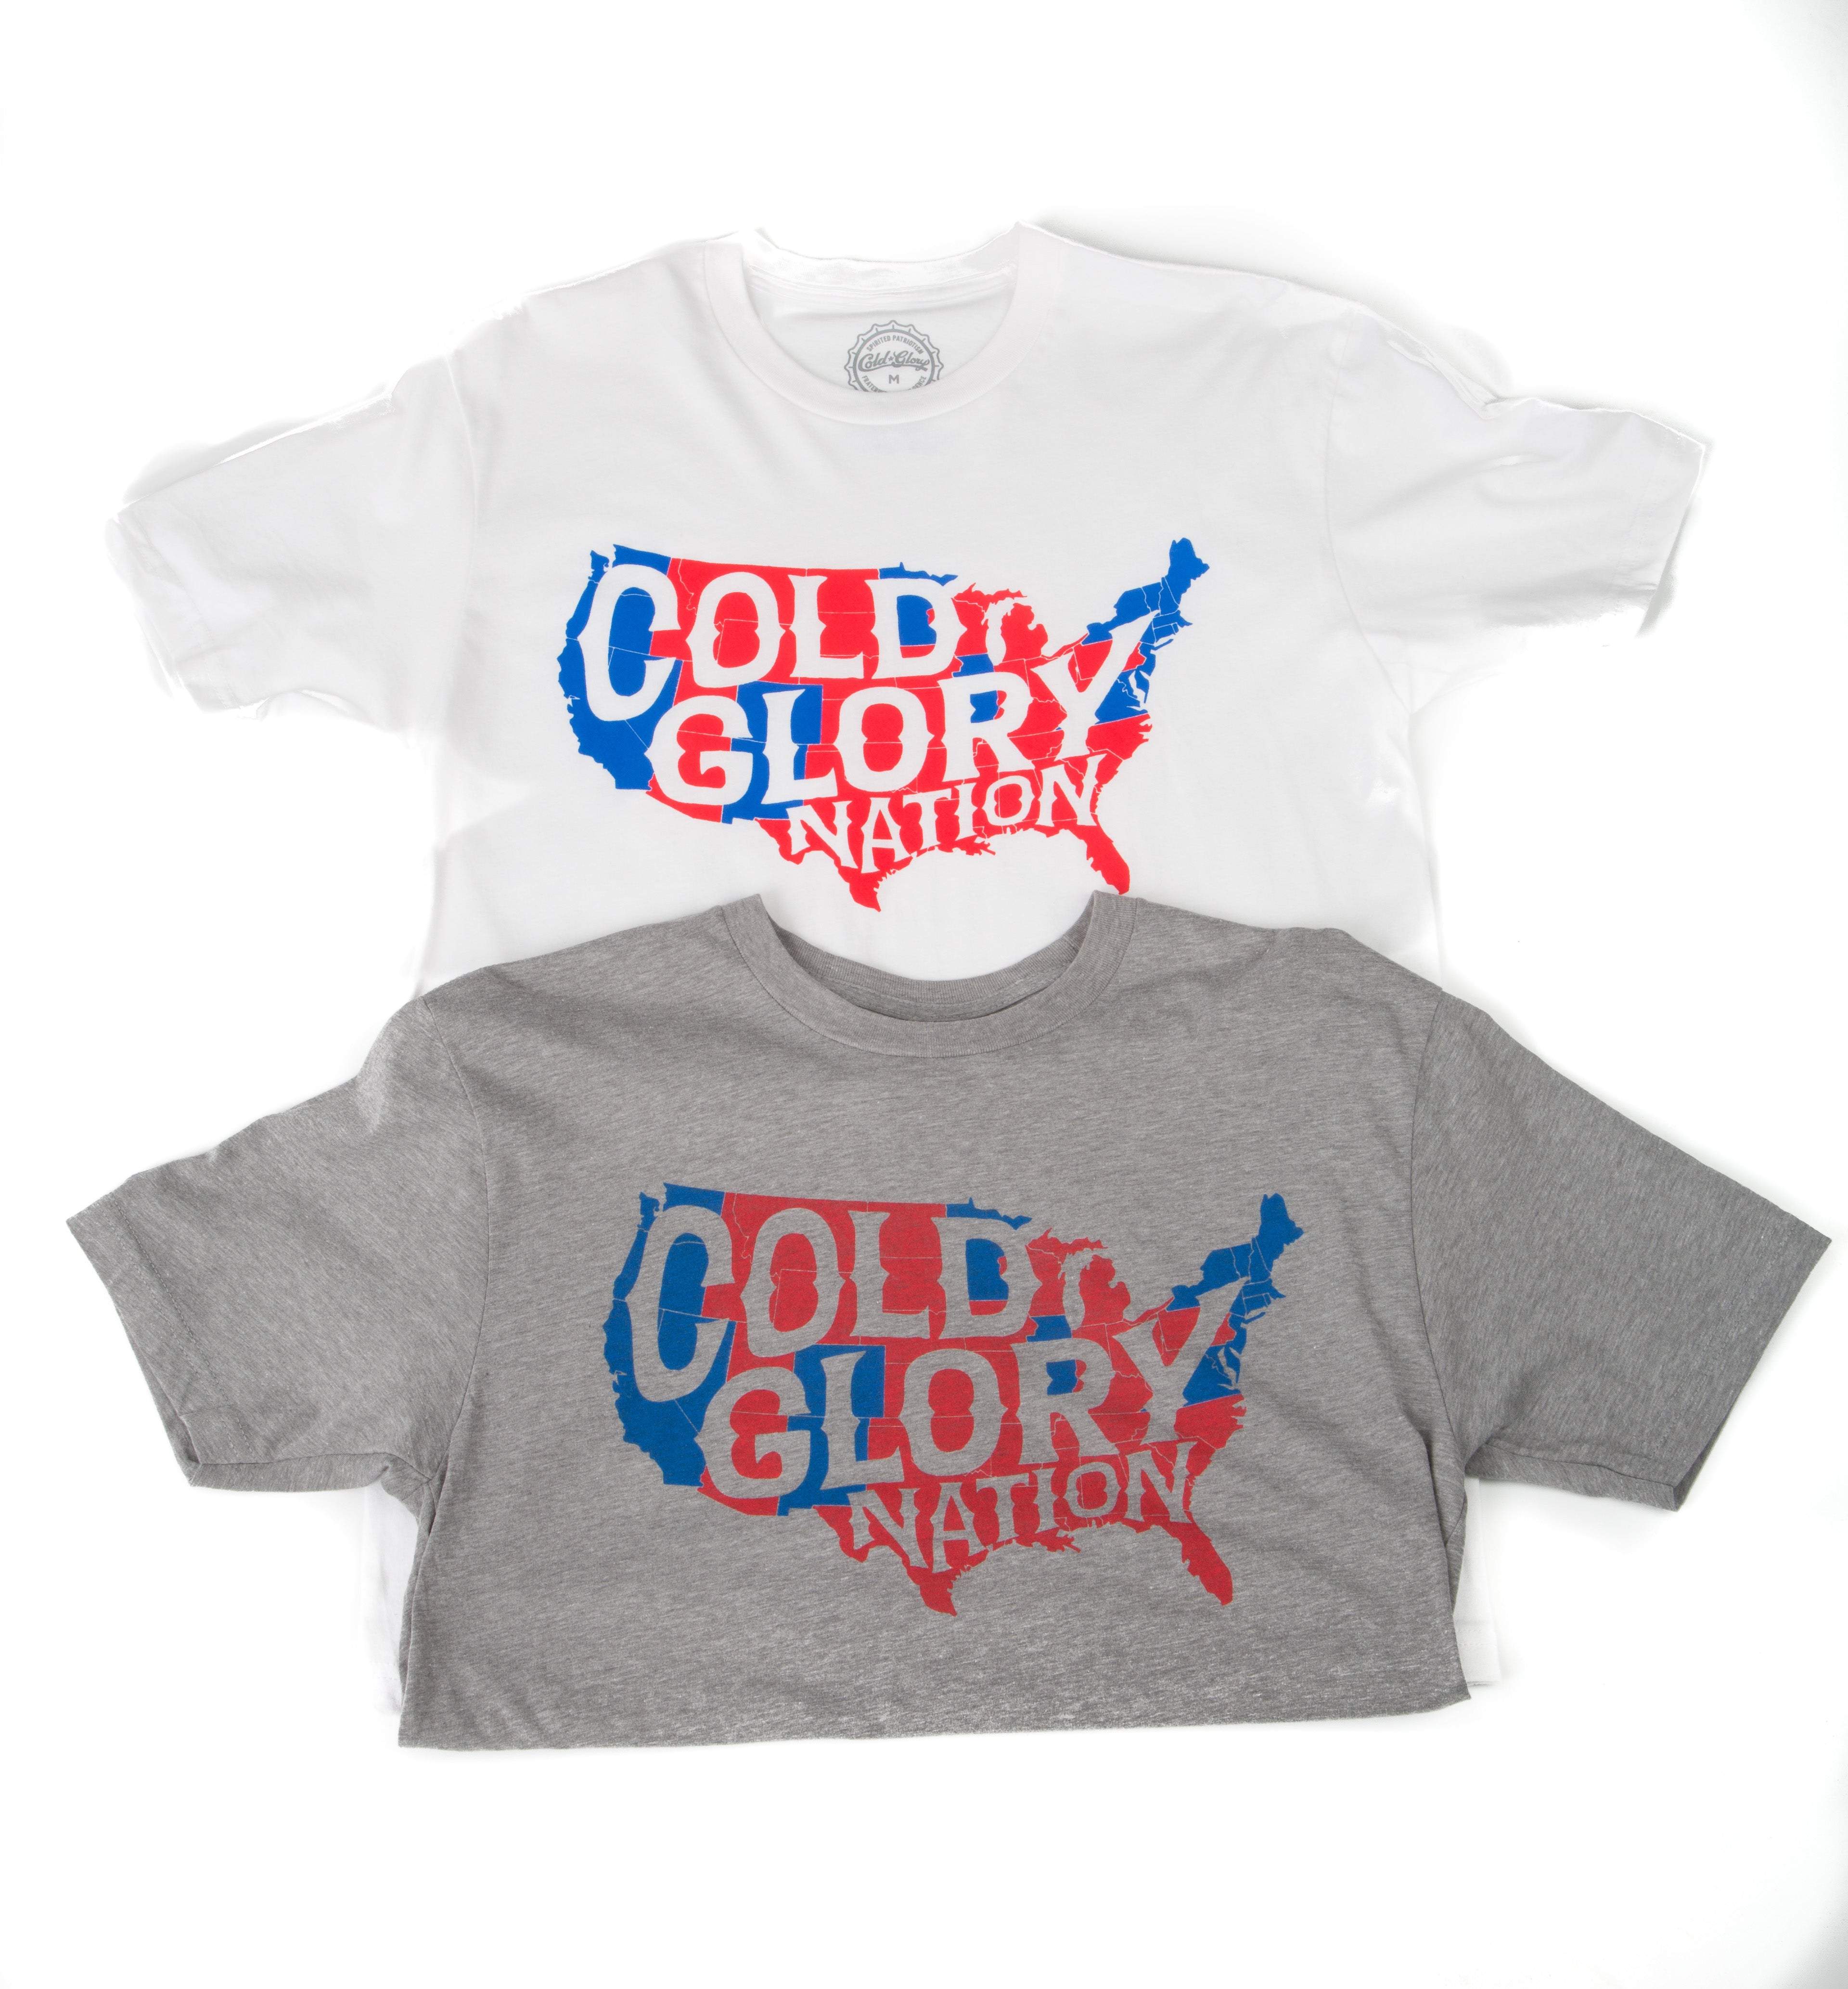 white and grey t-shirts with usa map showing red states vs blue states of cold glory nation